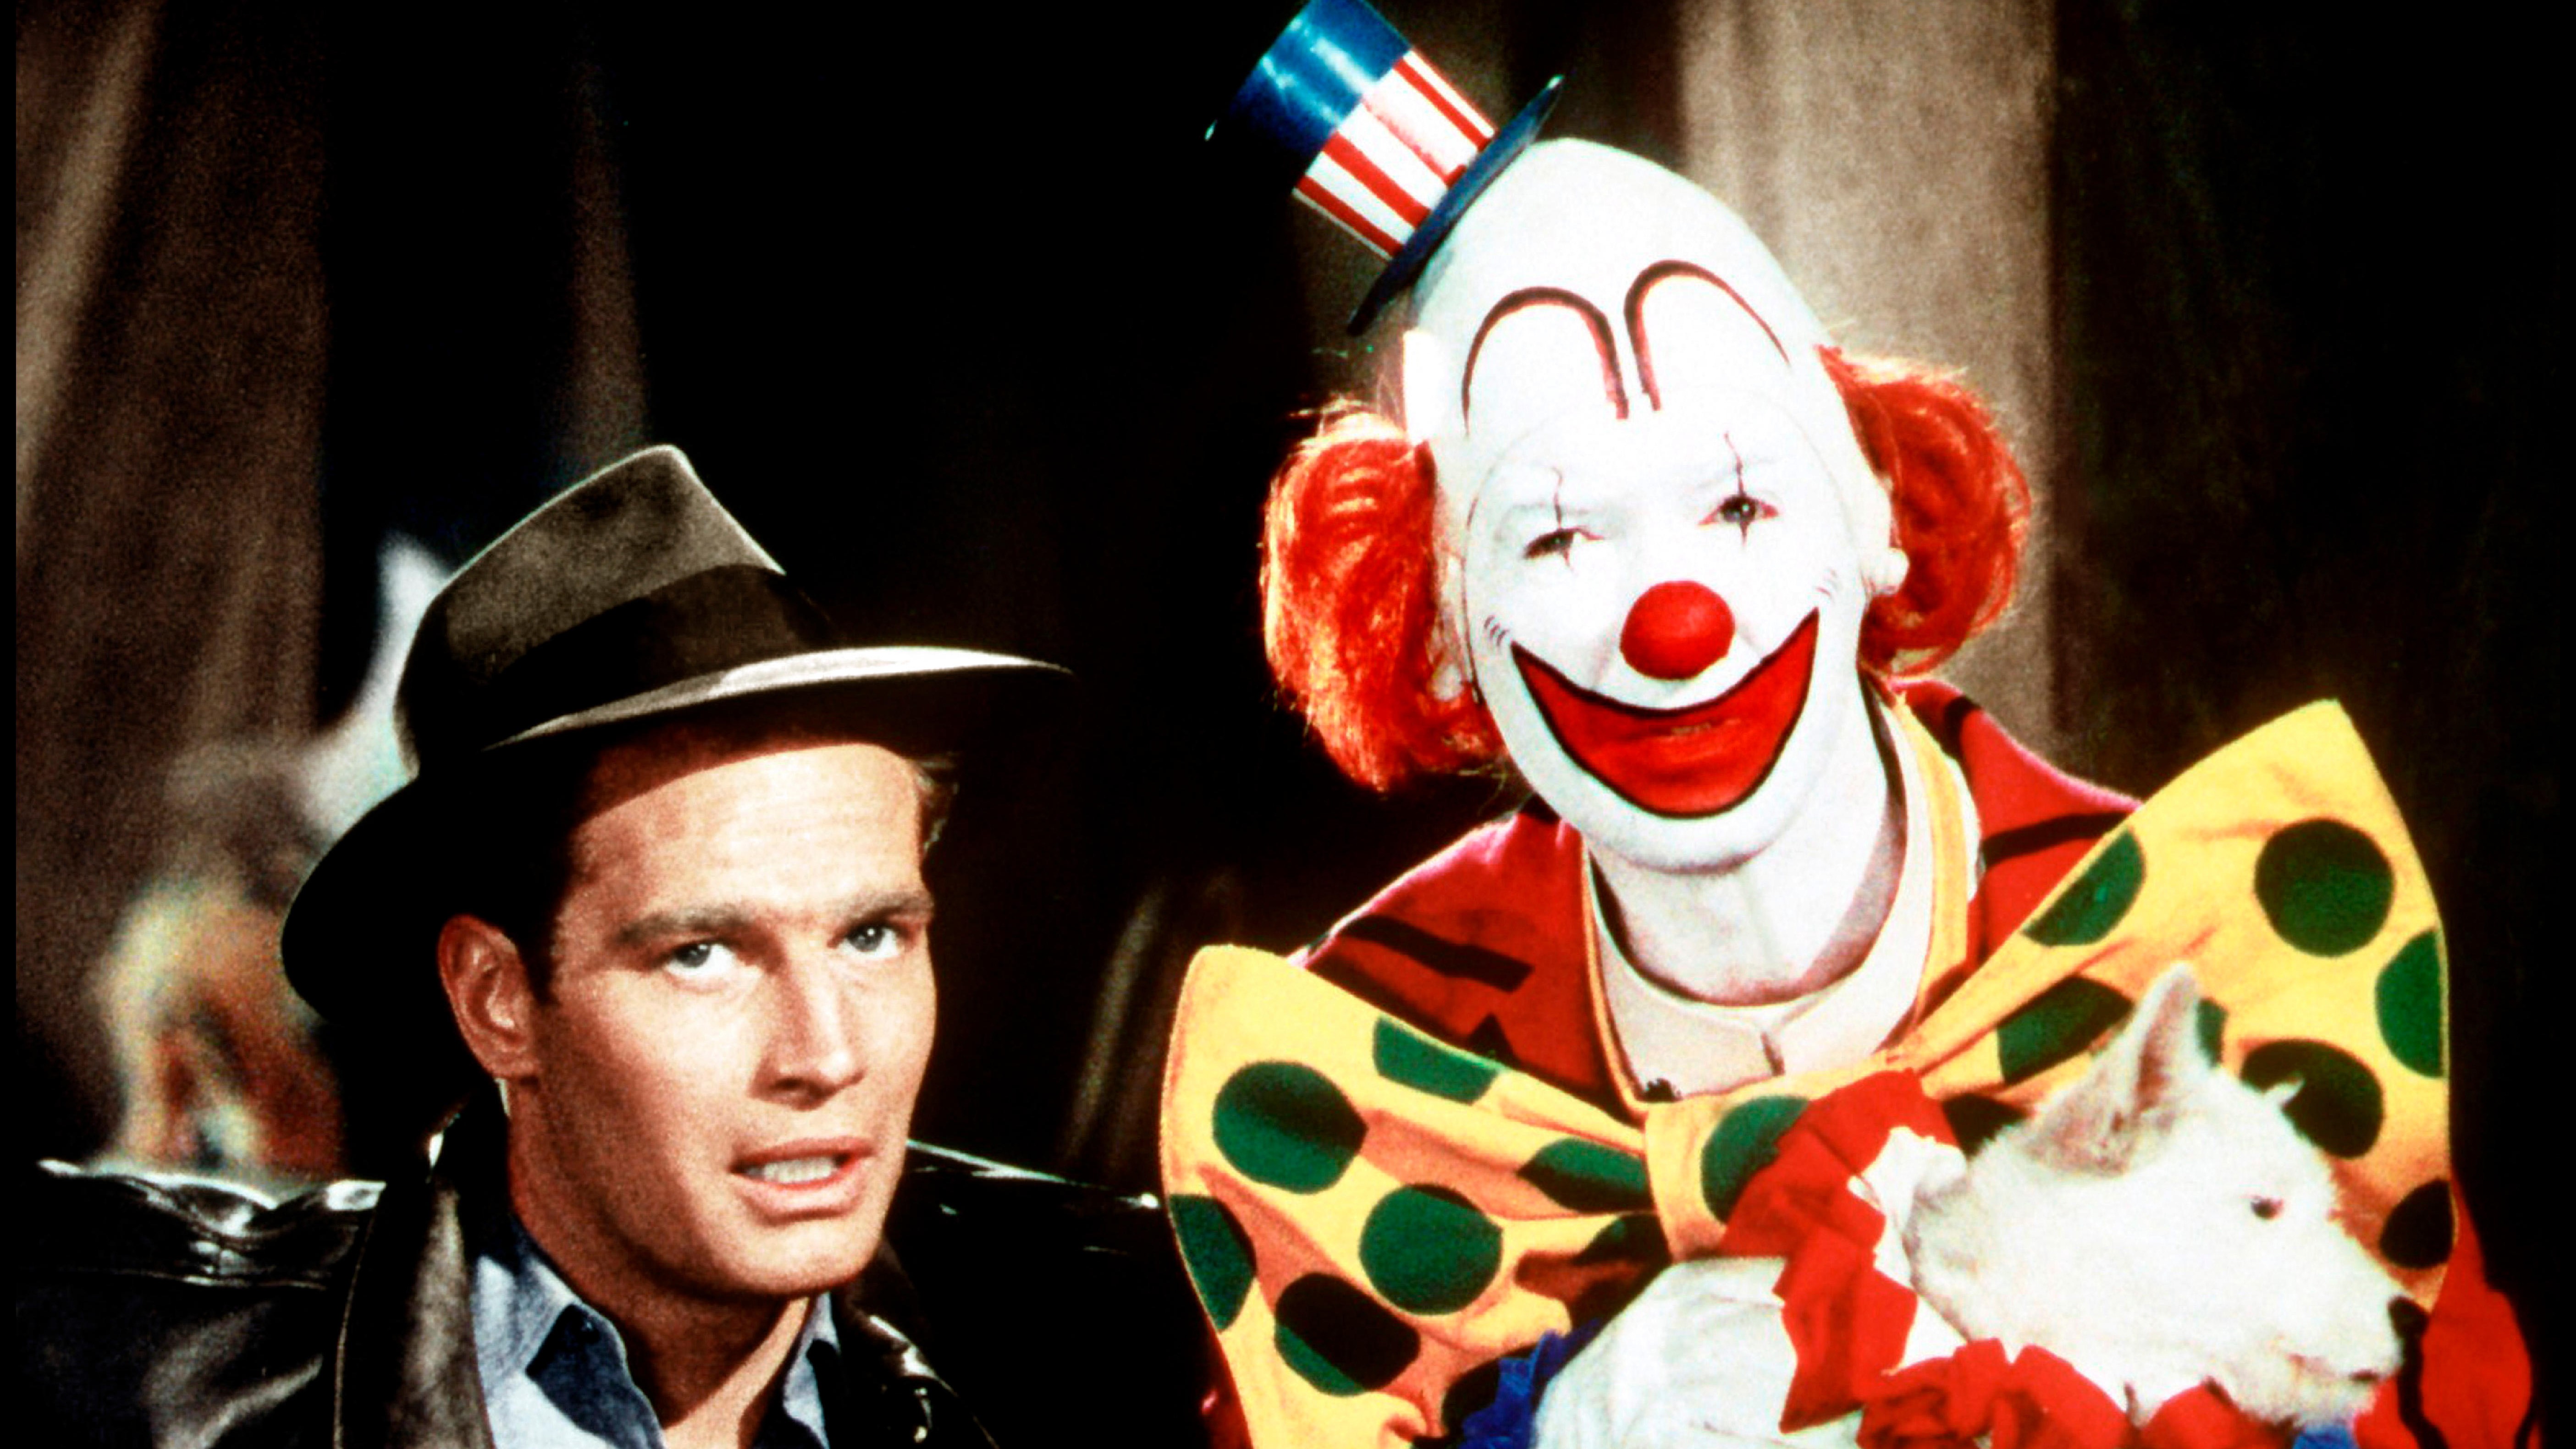 Charlton Heston and Jimmy Stewart in The Greatest Show on Earth